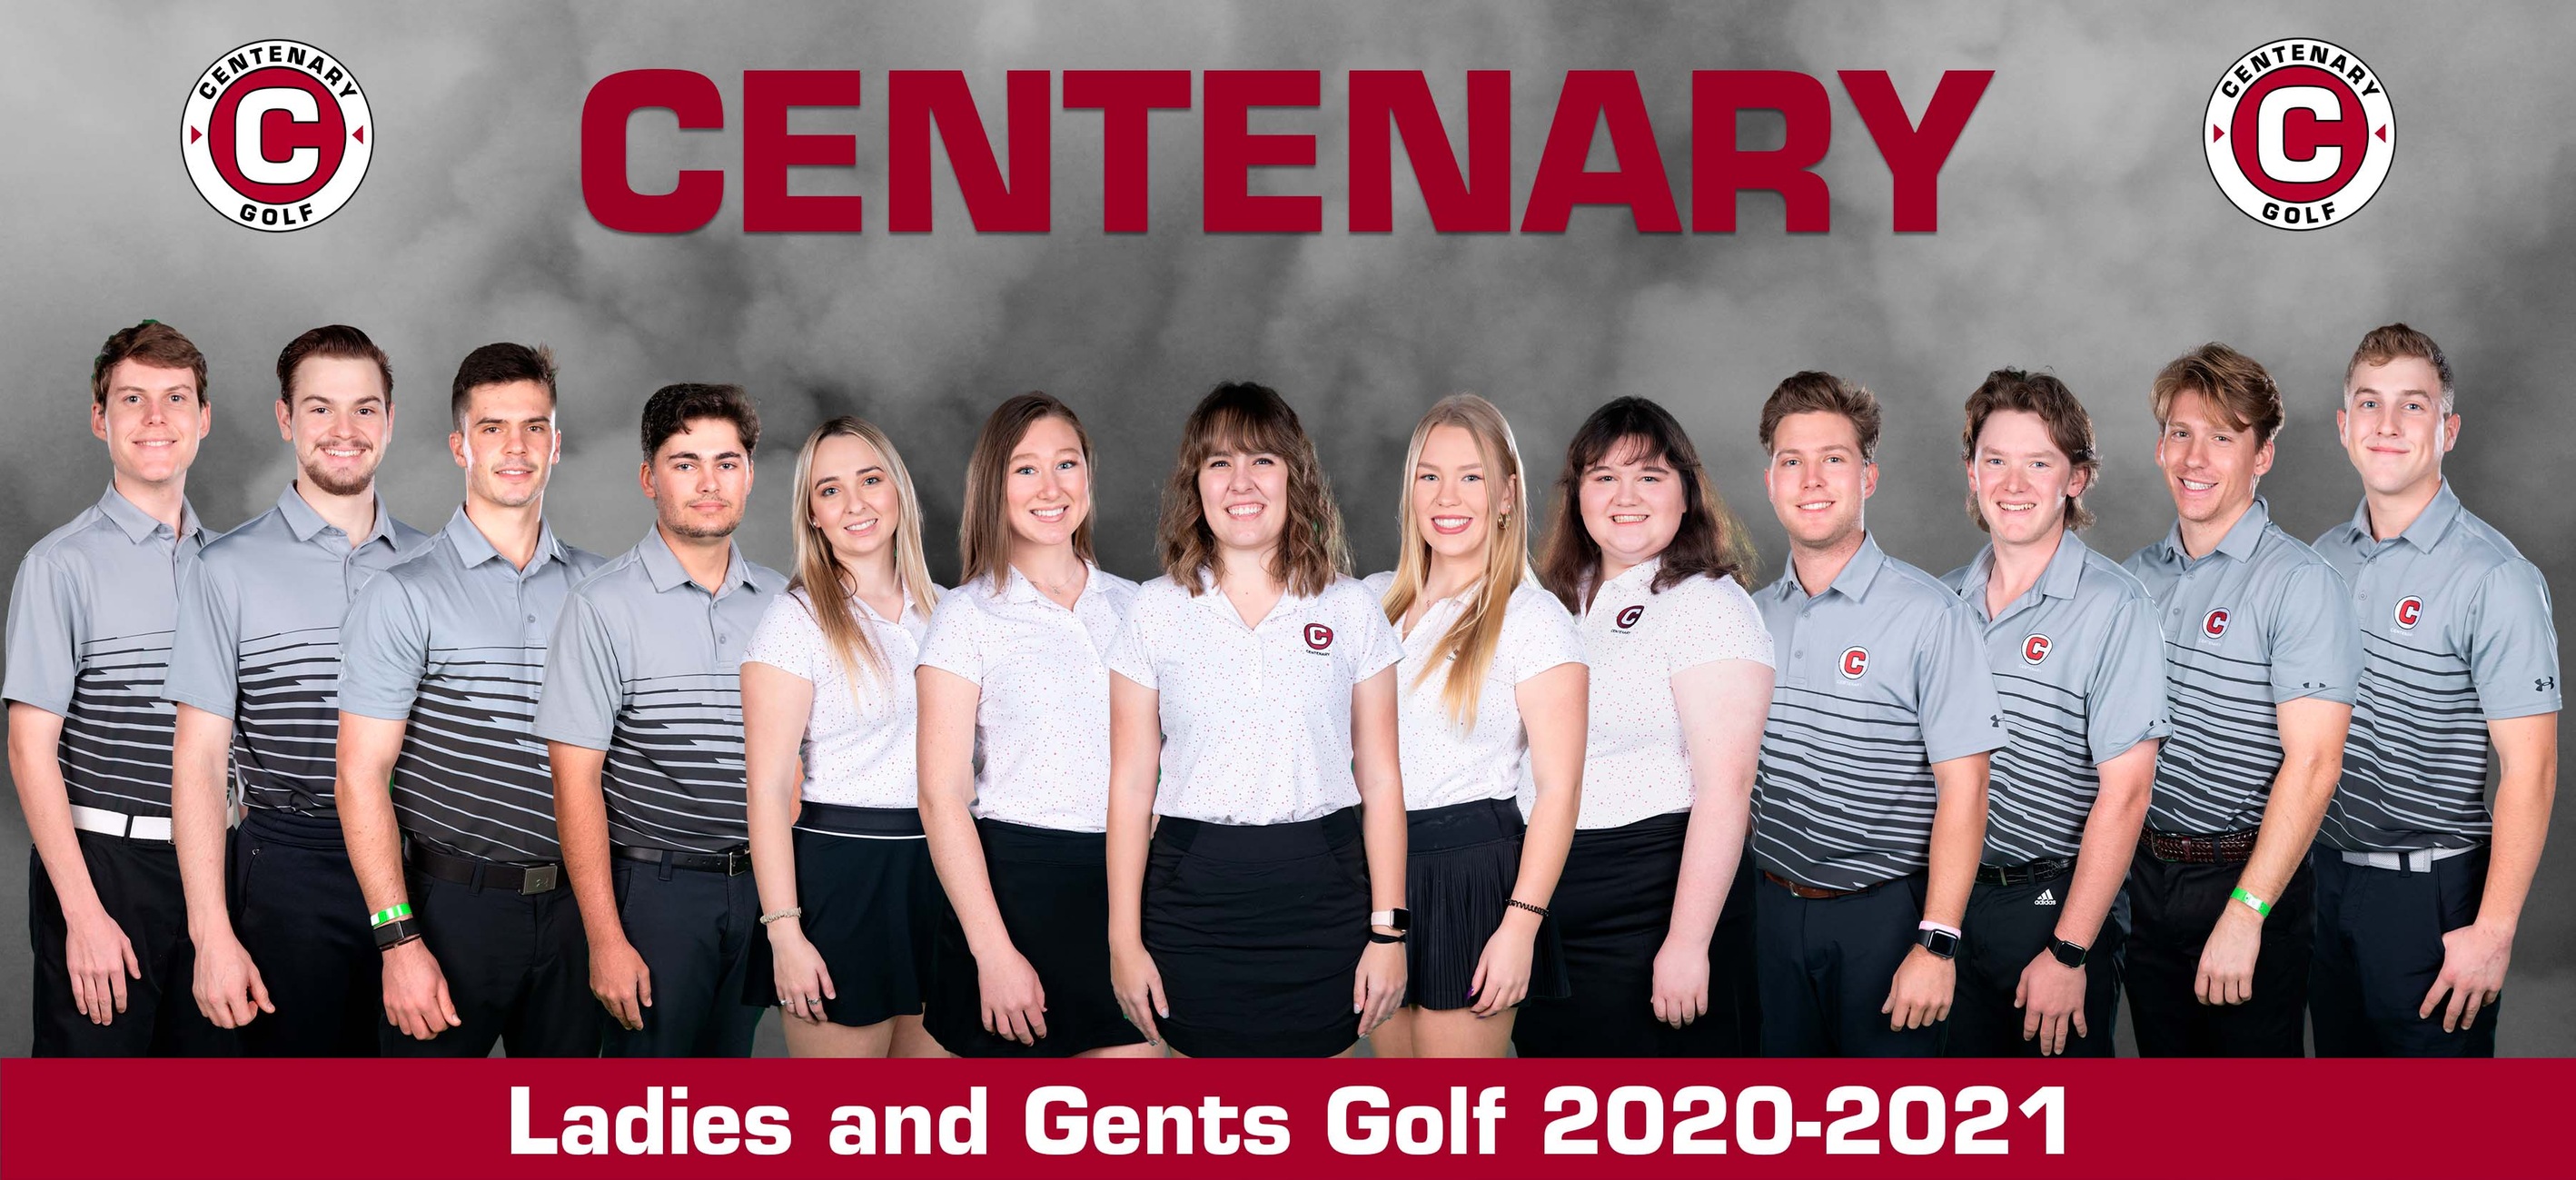 Centenary Set to Host Annual Hal Sutton Invitational Monday and Tuesday